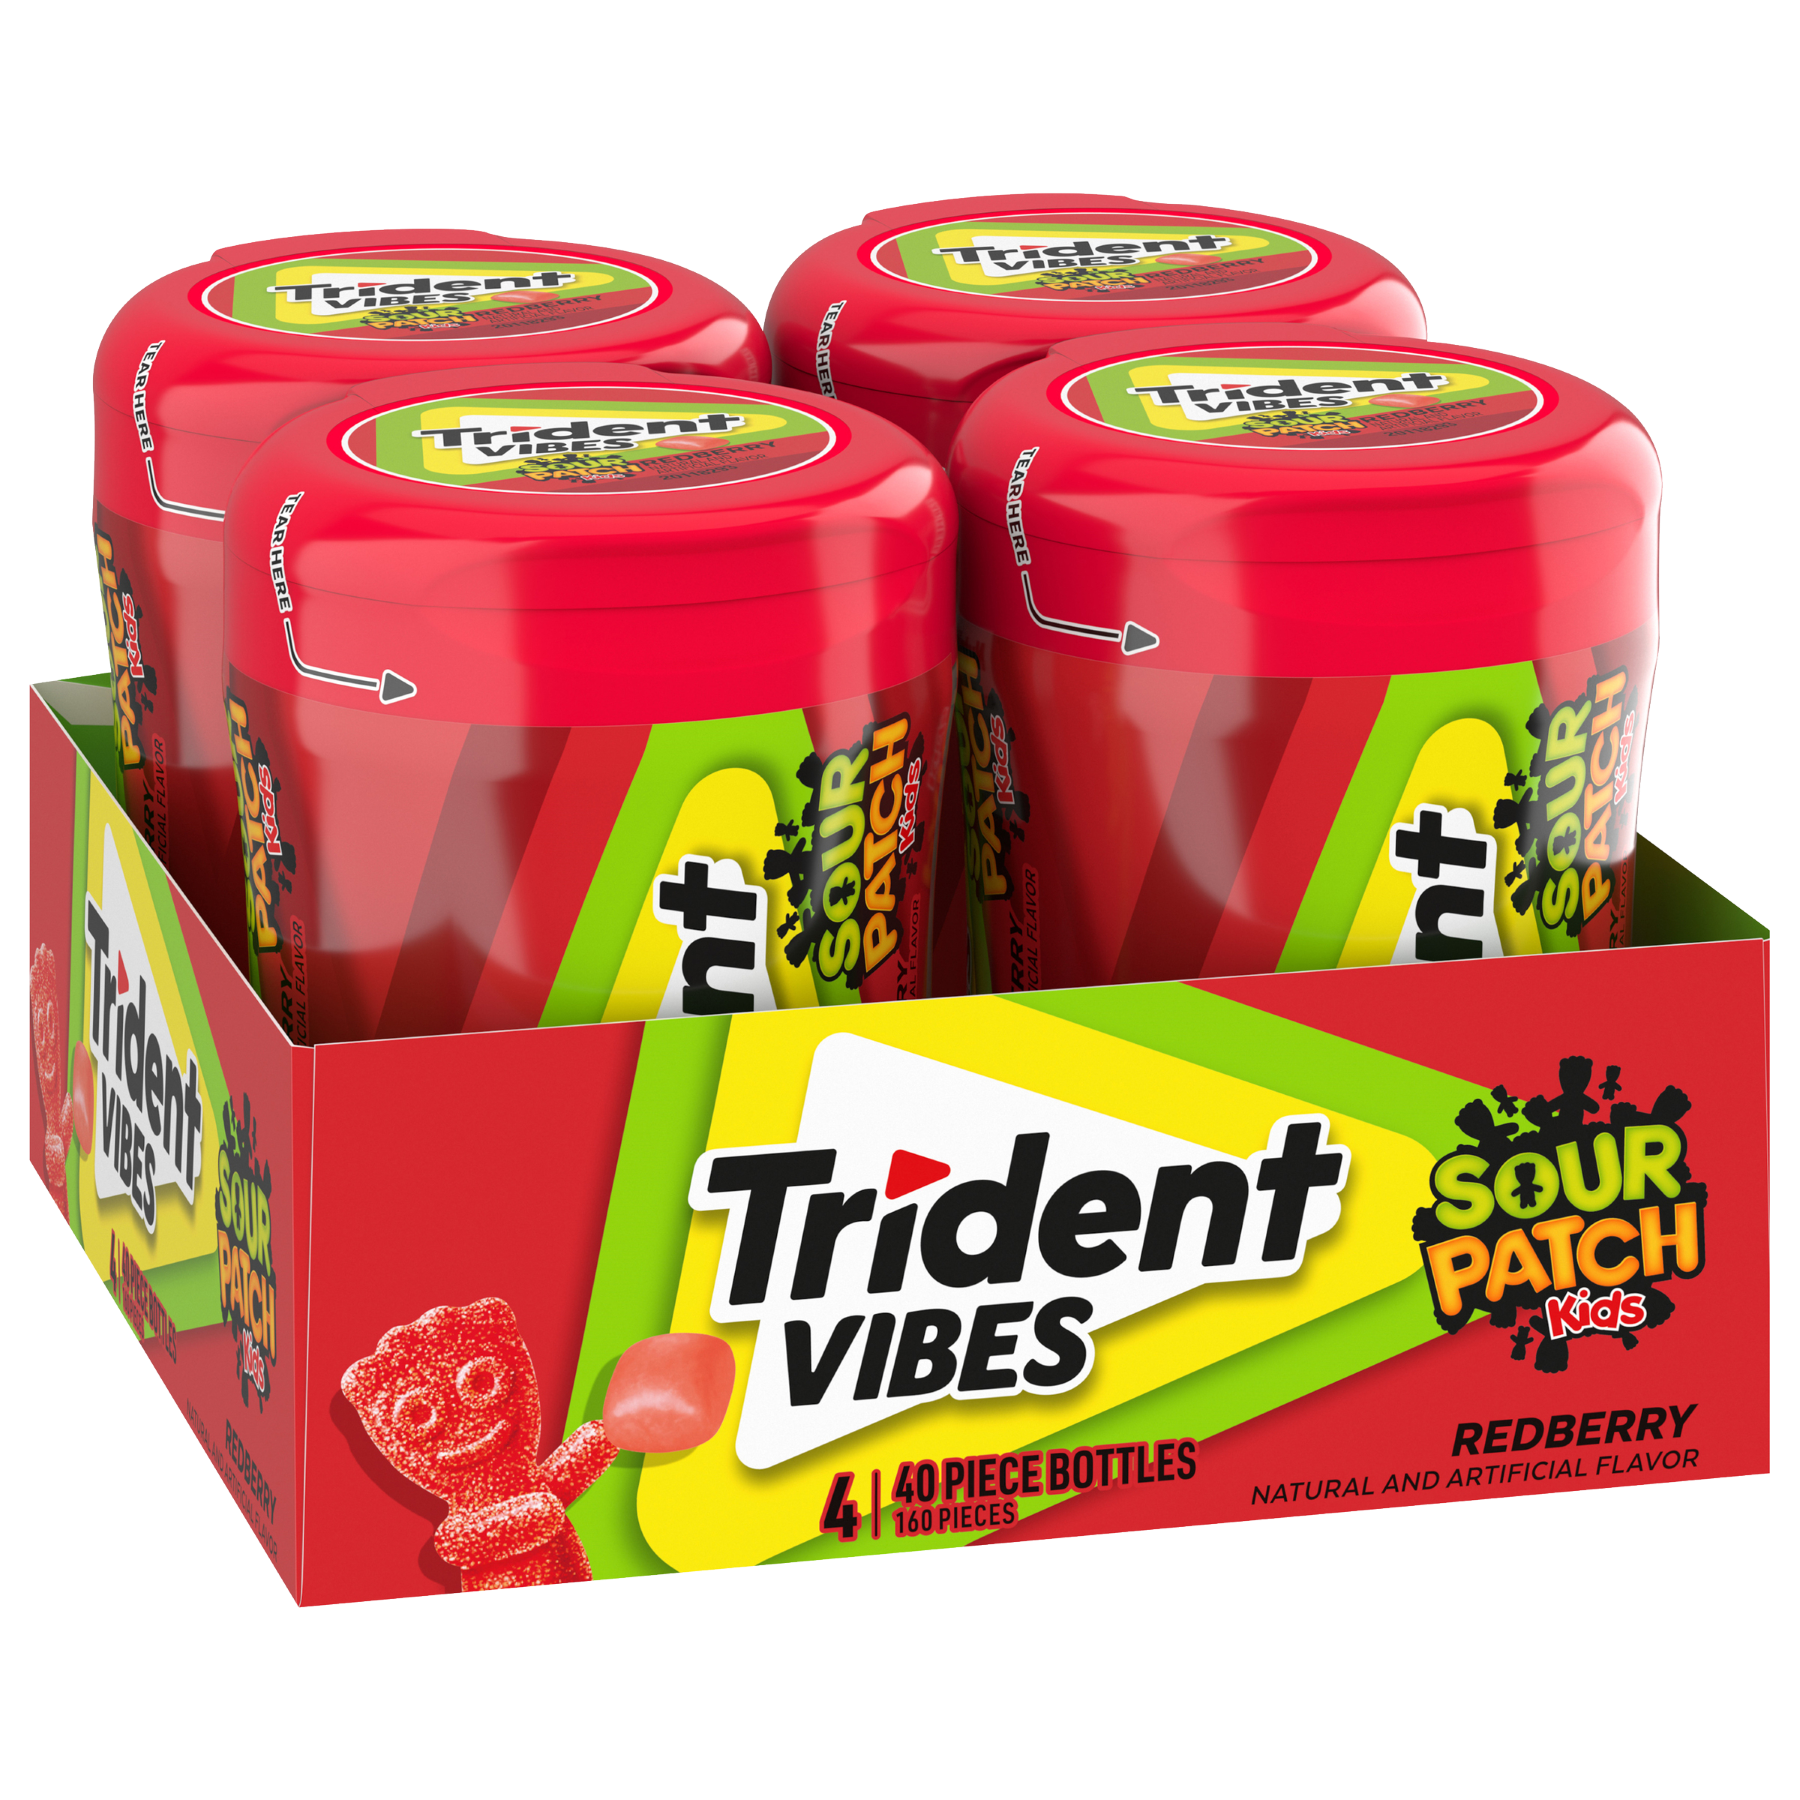 Trident vibes sour patch kids redberry 40pc 4ct